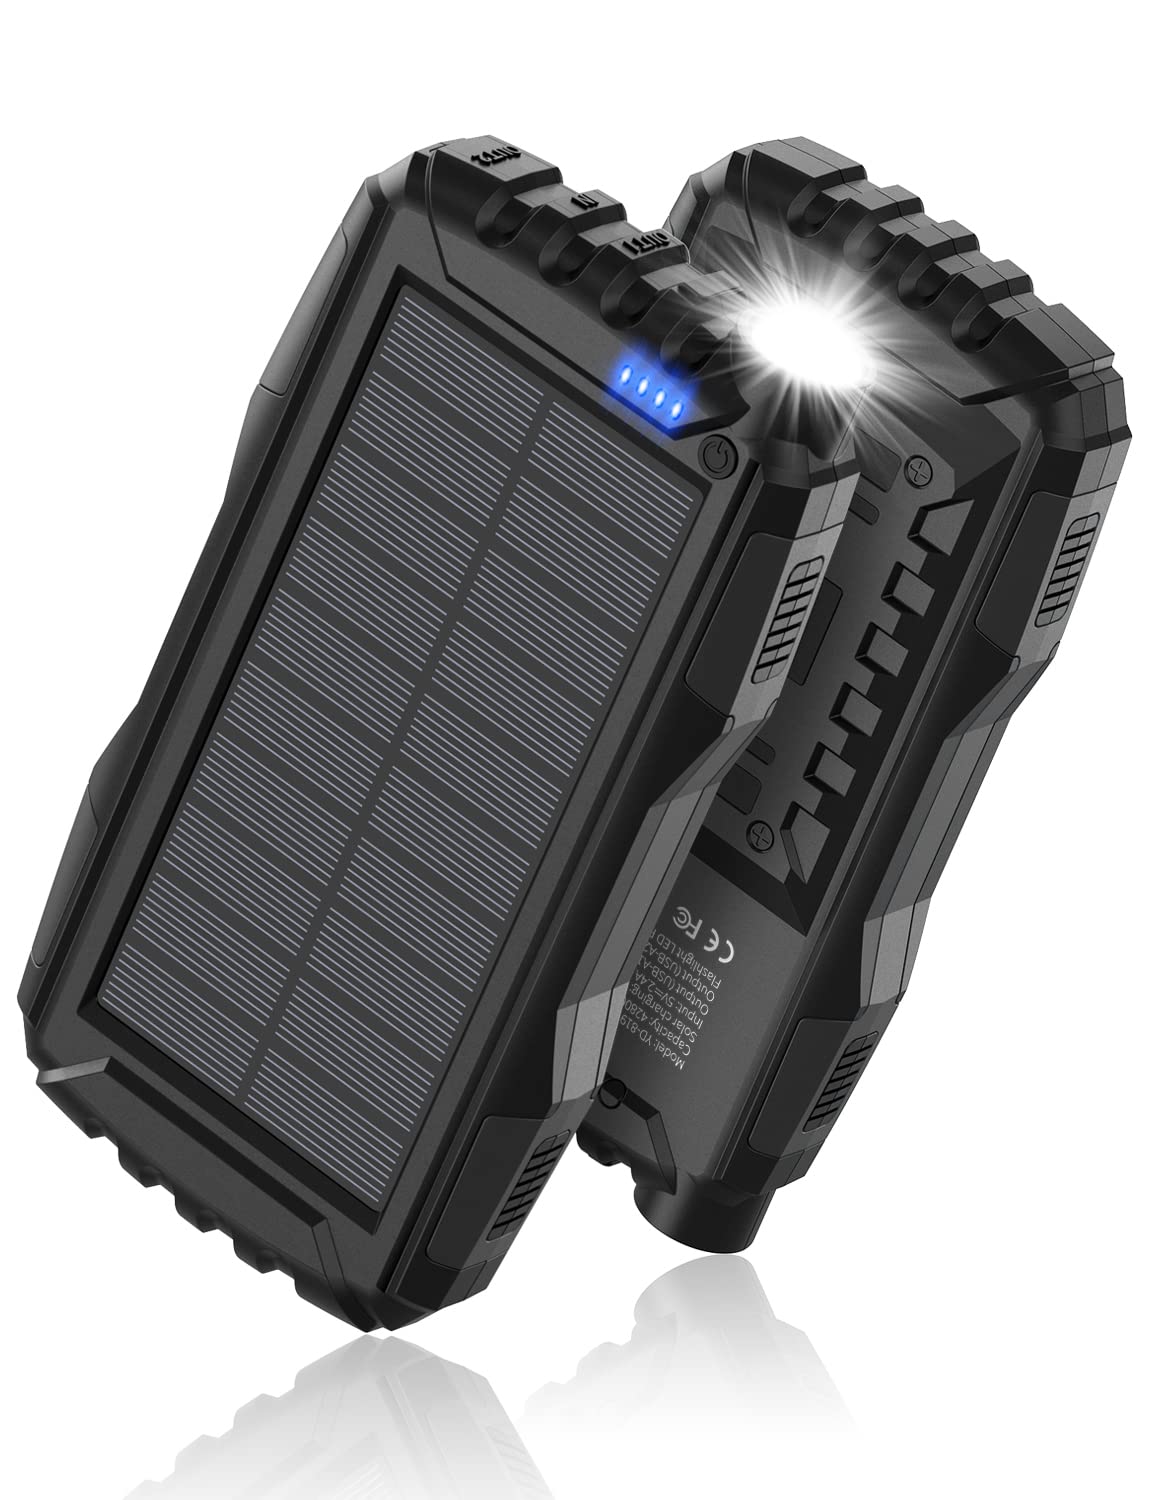 Solar-Charger-Power-Bank - 42800mAh Power Bank,Portable Charger,External Battery Pack 5V3.1A Qc 3.0 Fast Charging Built-in Super Bright Flashlight (Deep Black)